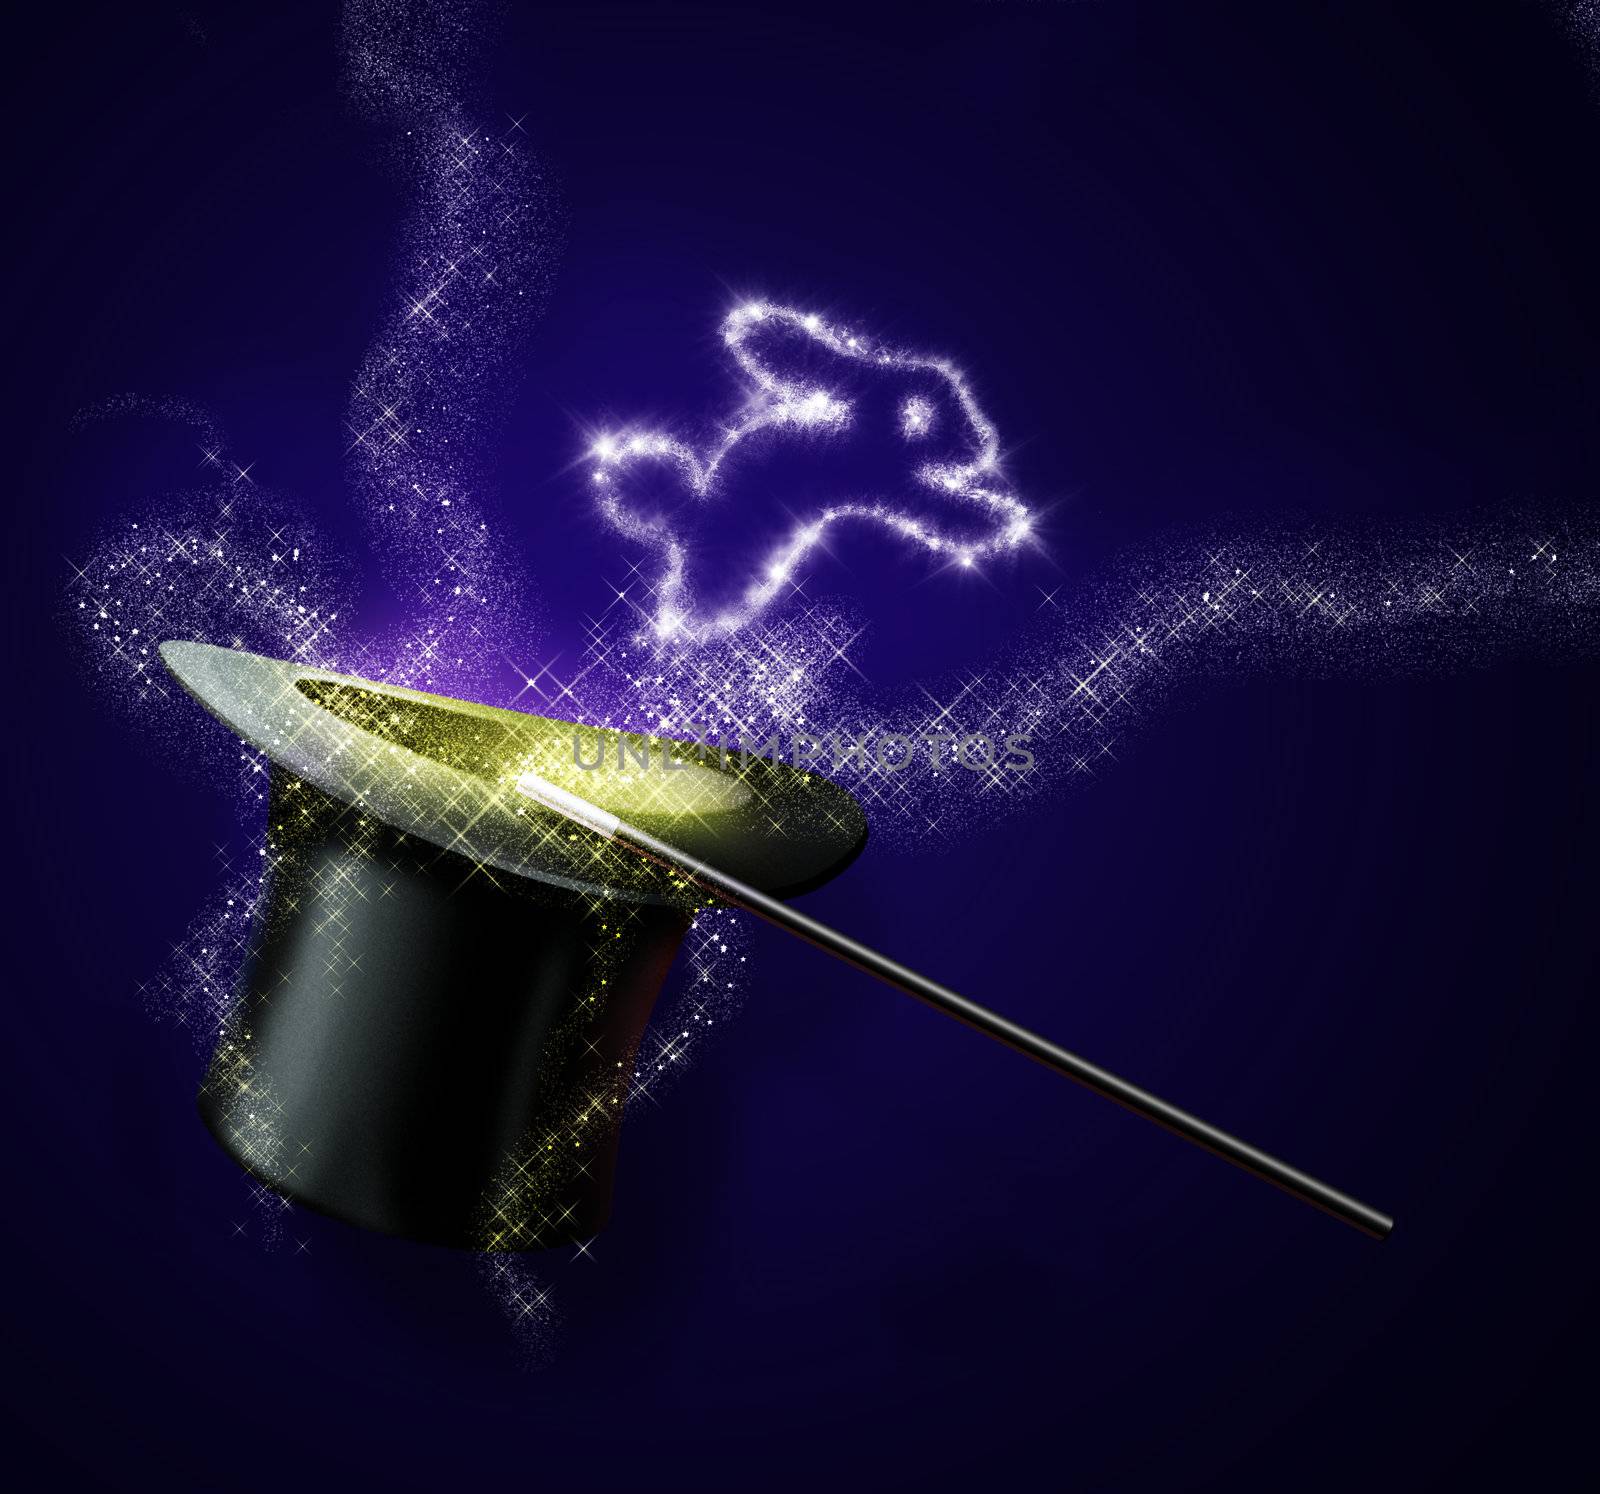 light rabbit jump out from magic black hat  and magic wand isolated on purple blackground by feiillustration